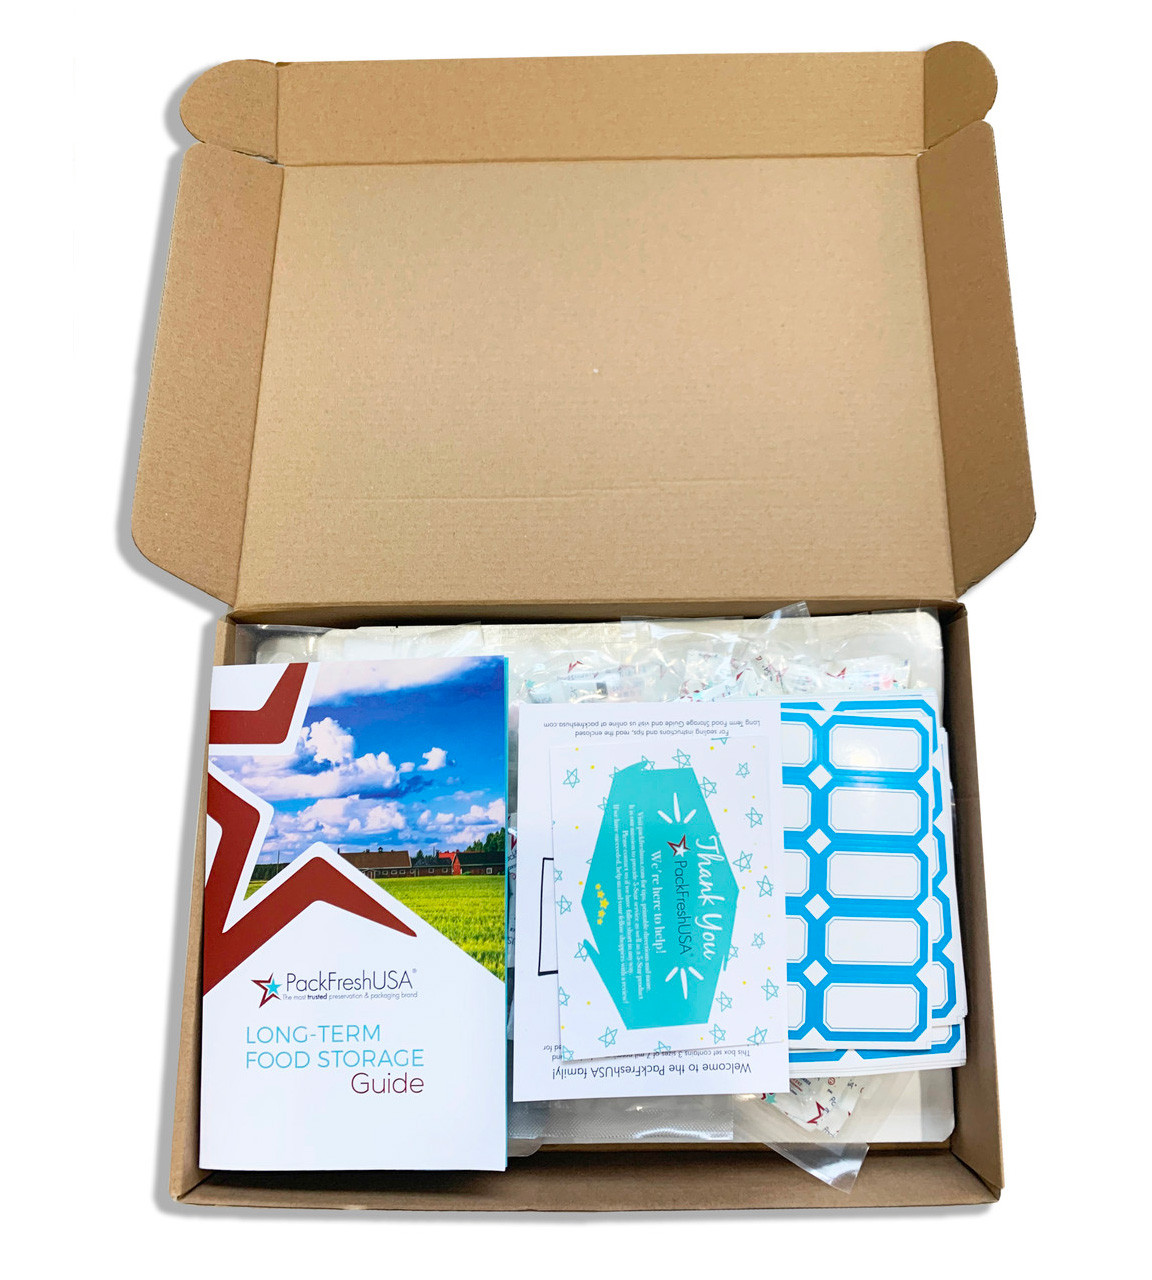 https://cdn11.bigcommerce.com/s-uyn0oyt/images/stencil/1280x1280/products/370/2739/PackFreshUSA-Mylar-Bags-and-Oxygen-Absorbers-Box-Set-4__36694.1680108297.jpg?c=2